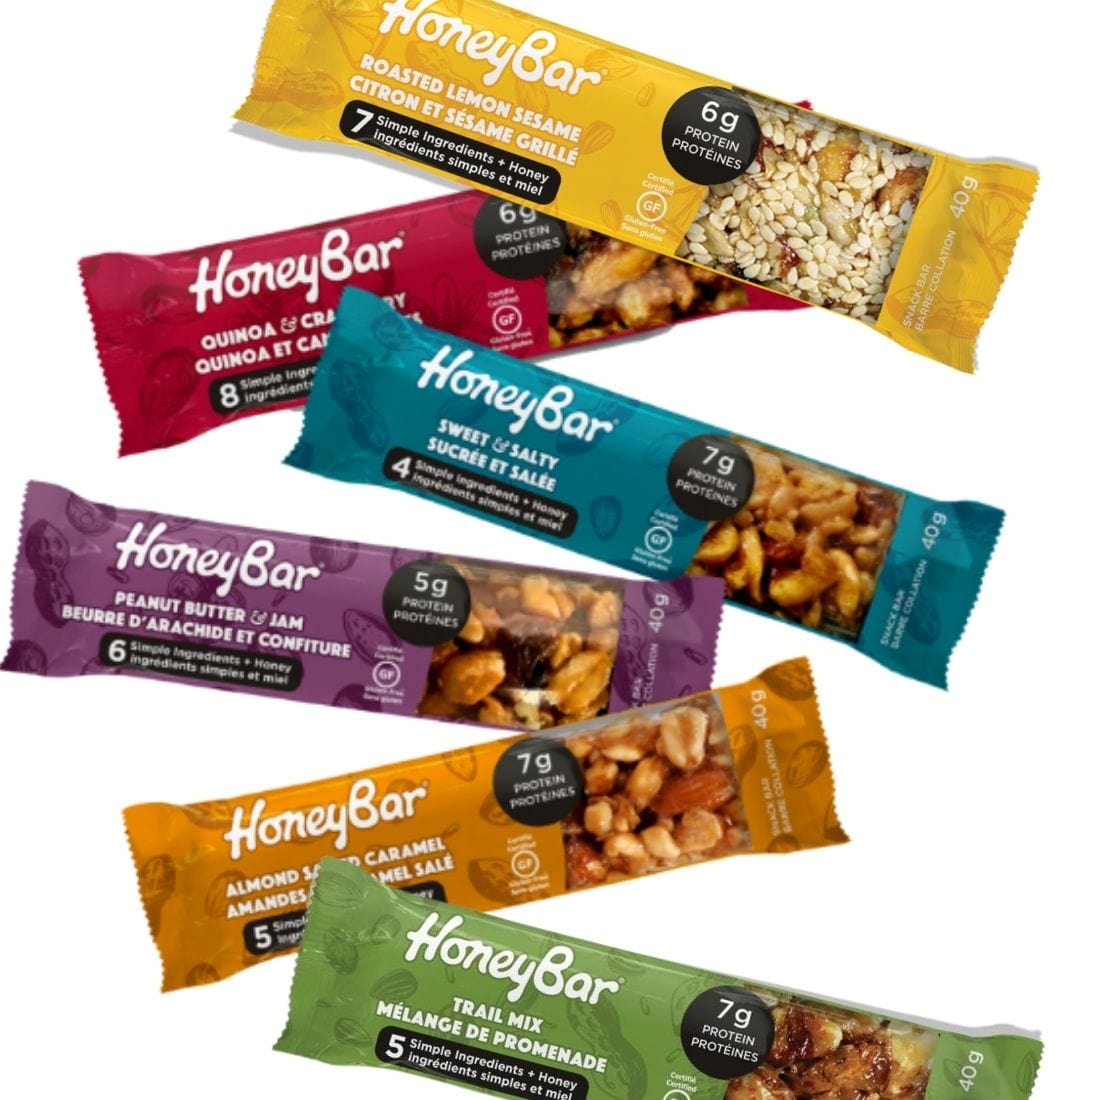 Yoga Bar Wants To Become The Go-To Brand for Healthy Snacking - SmartCEO